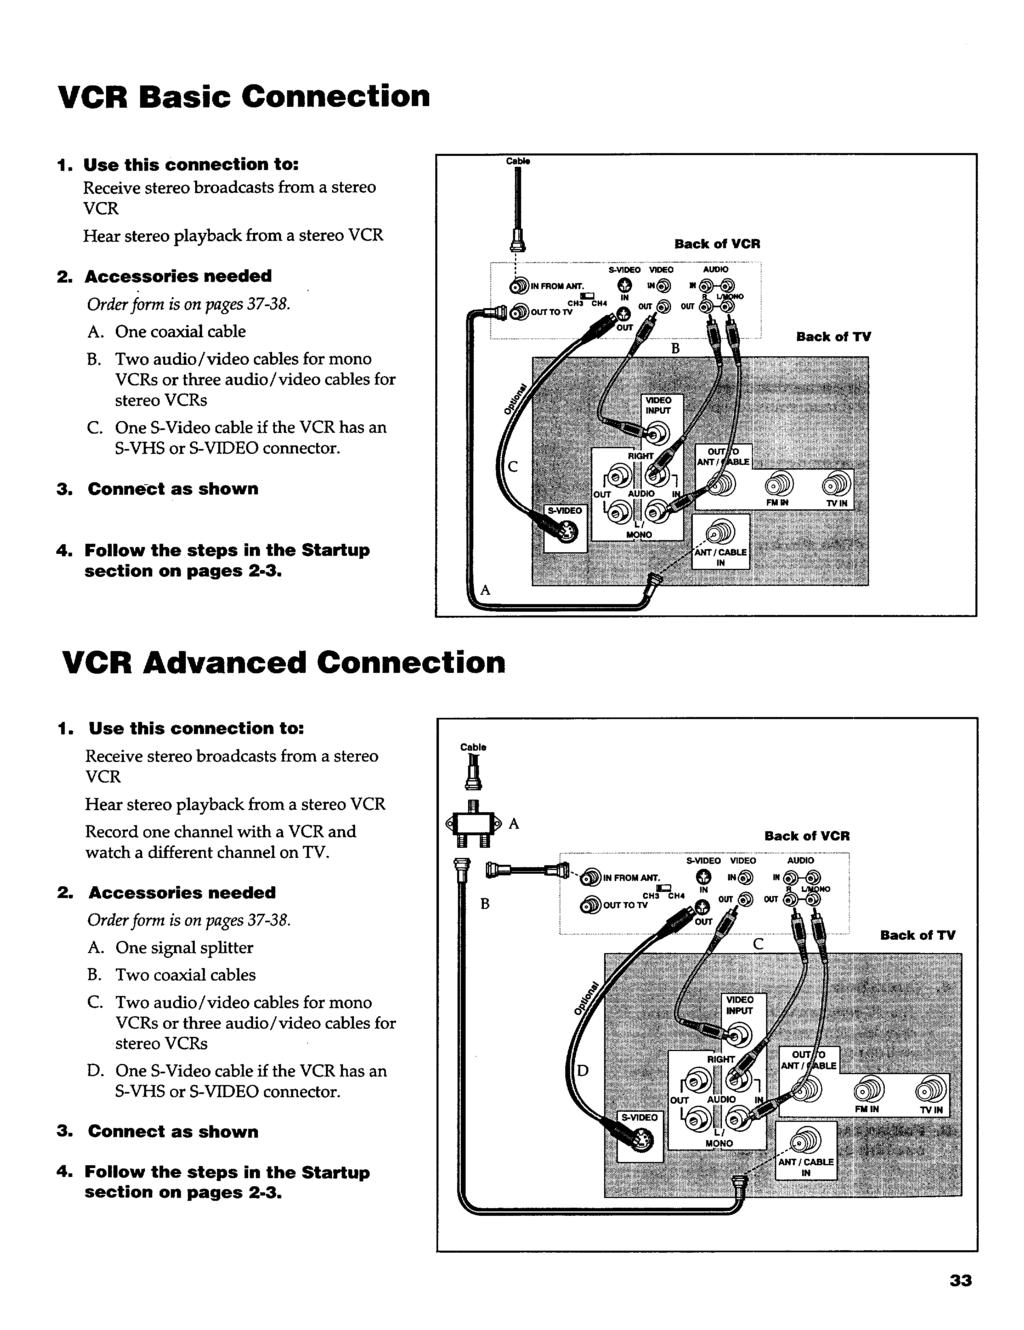 VCR Basic Connection 1 Use this connection to: Receive stereo broadcasts from a stereo VCR Hear stereo playback from a stereo VCR Cable Back of VCR. Accessories needed Order form is on pages 37-38. A. One coaxial cable B.